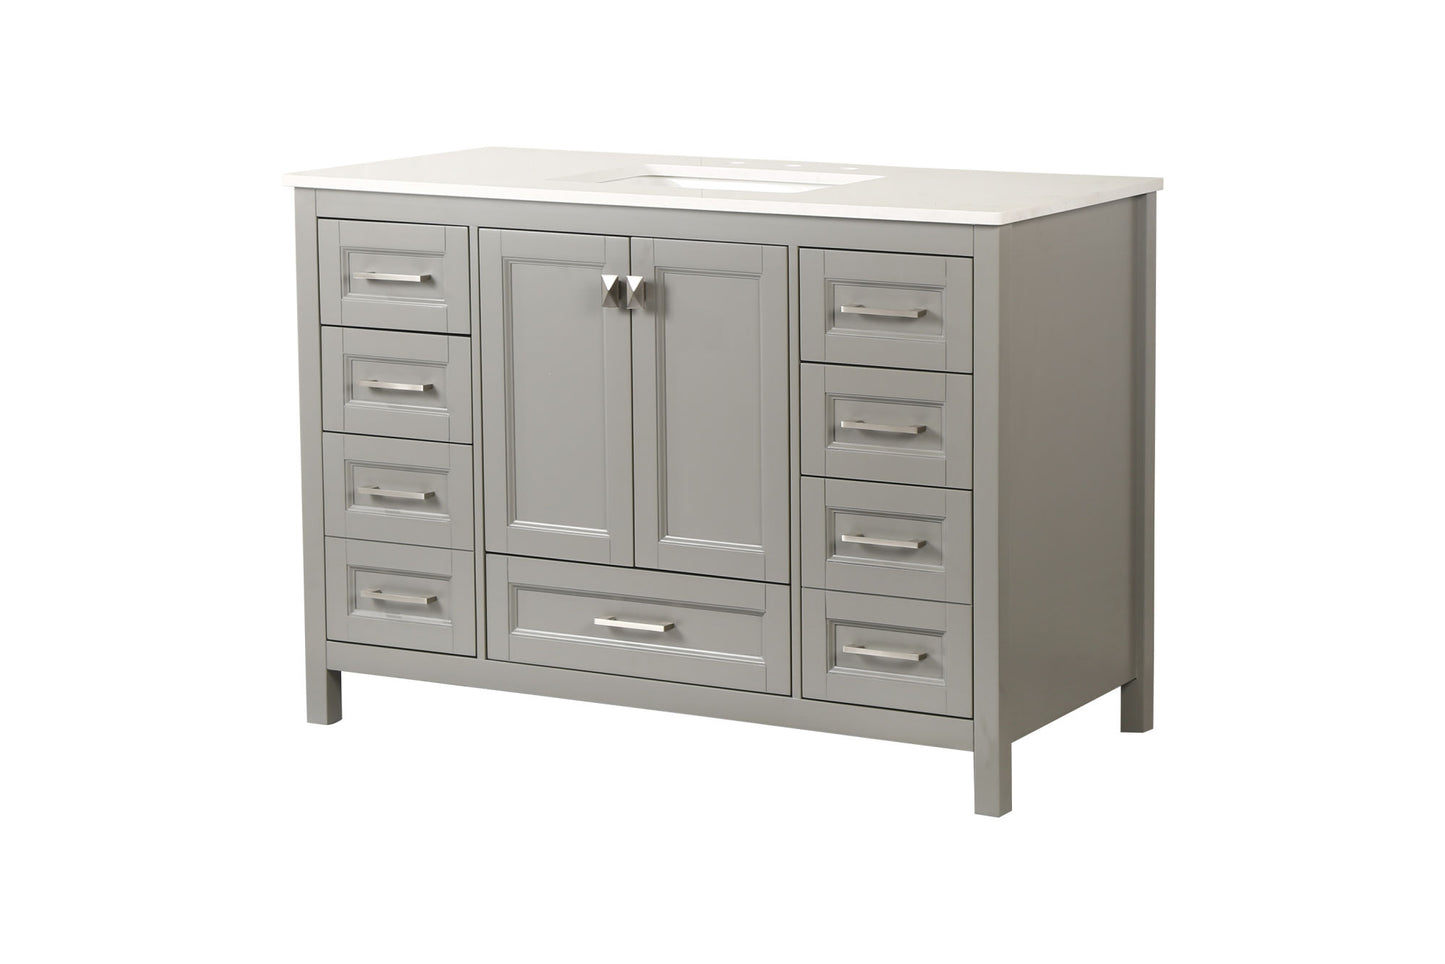 Vanity Sink Combo featuring a Marble Countertop, Bathroom Sink Cabinet, and Home Decor Bathroom Vanities - Fully Assembled Grey 48-inch Vanity with Sink 23V03-48GR